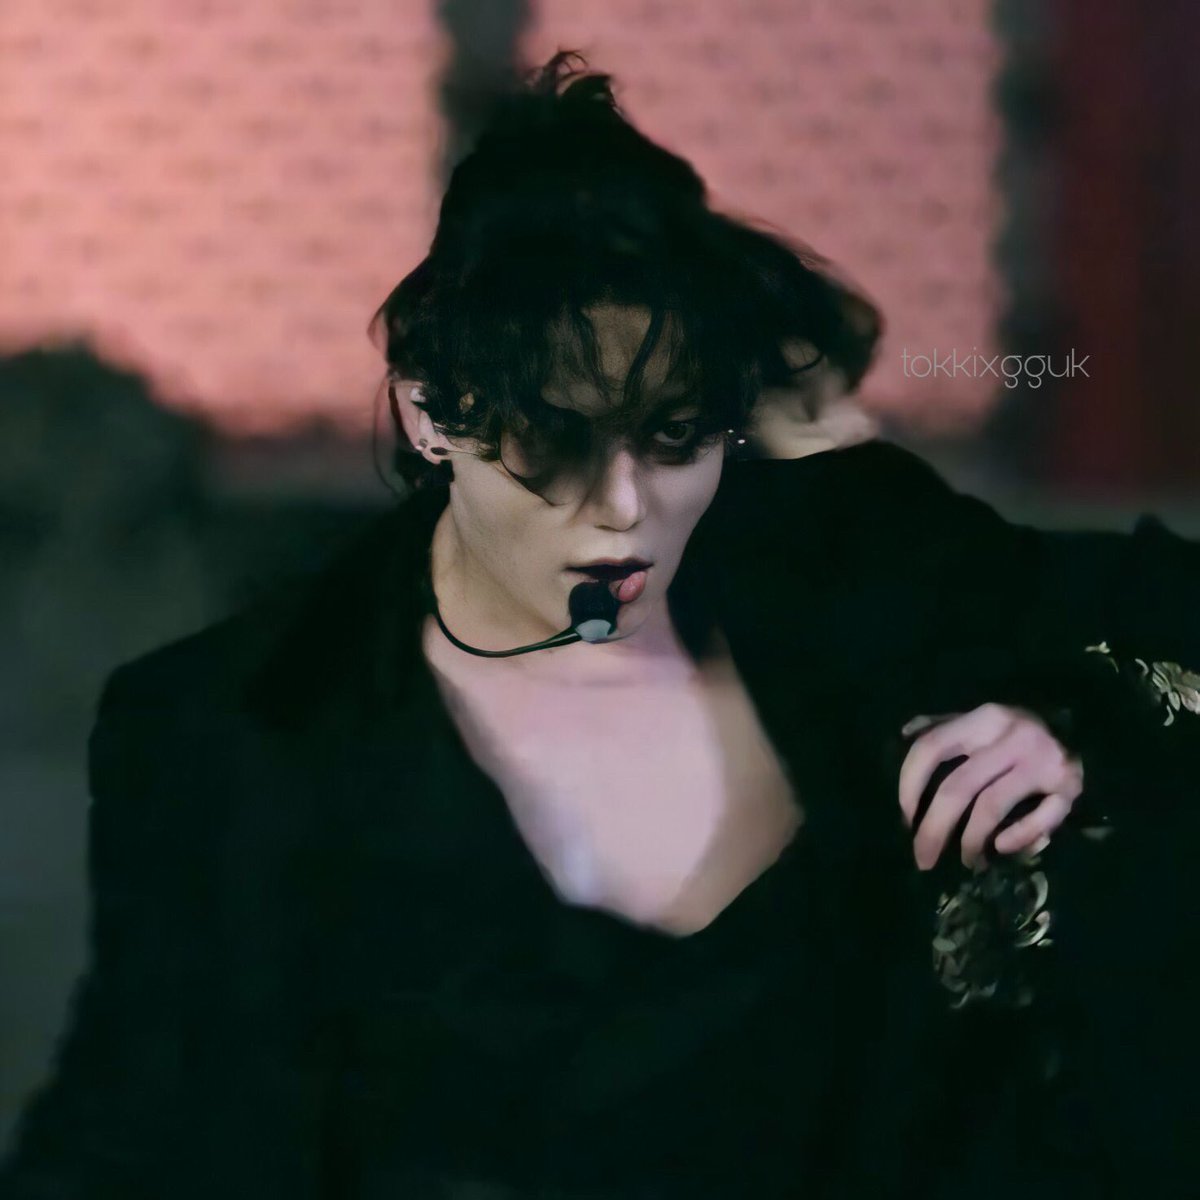 his chest 